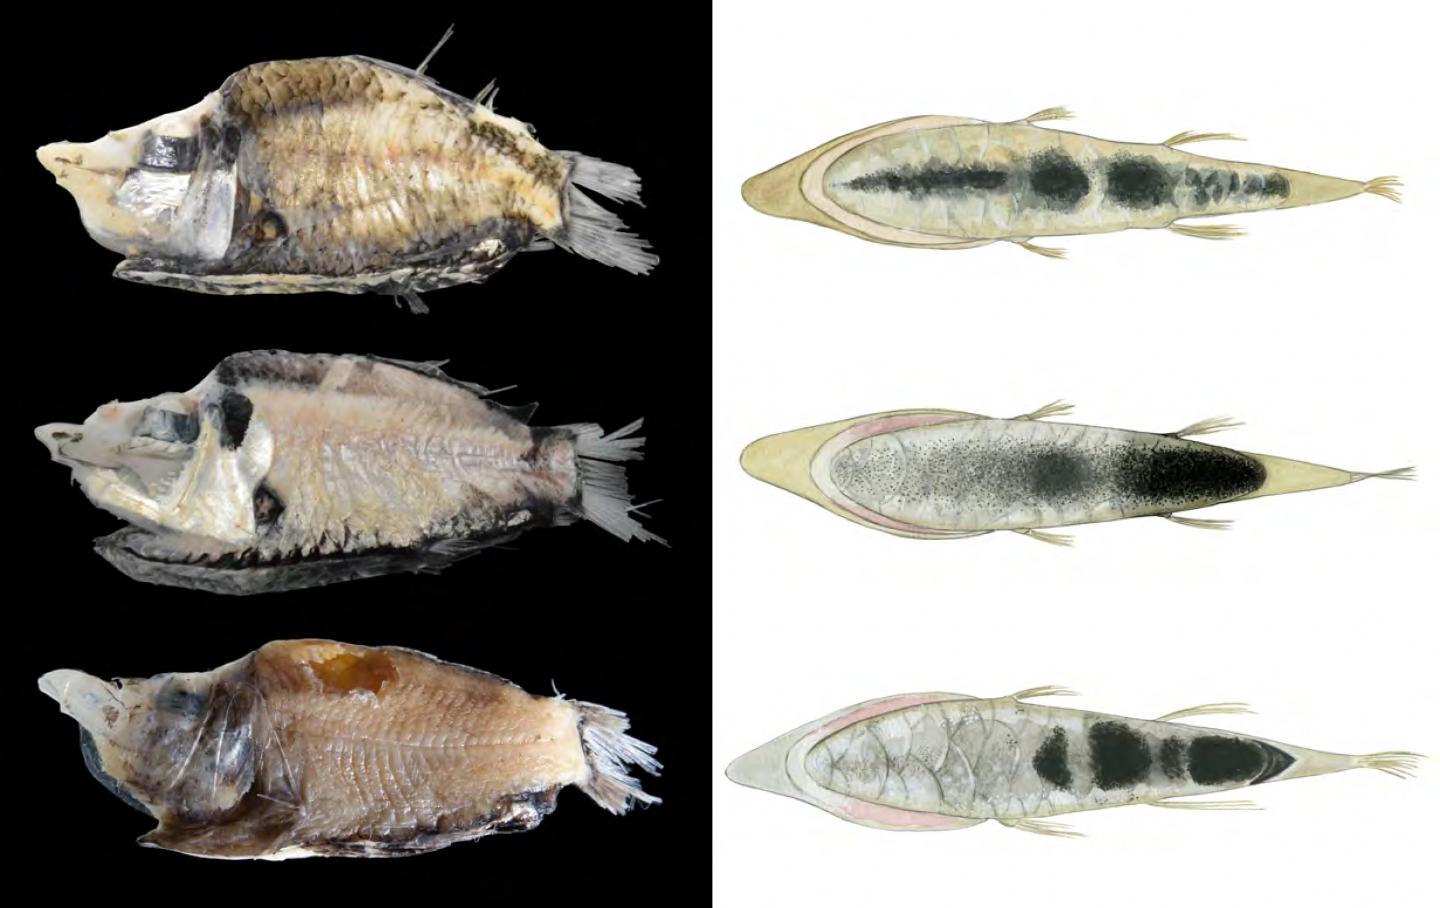 Morphological Analysis of a Light-Controlling Organ Suggests Two New Deep-Sea Fish Species